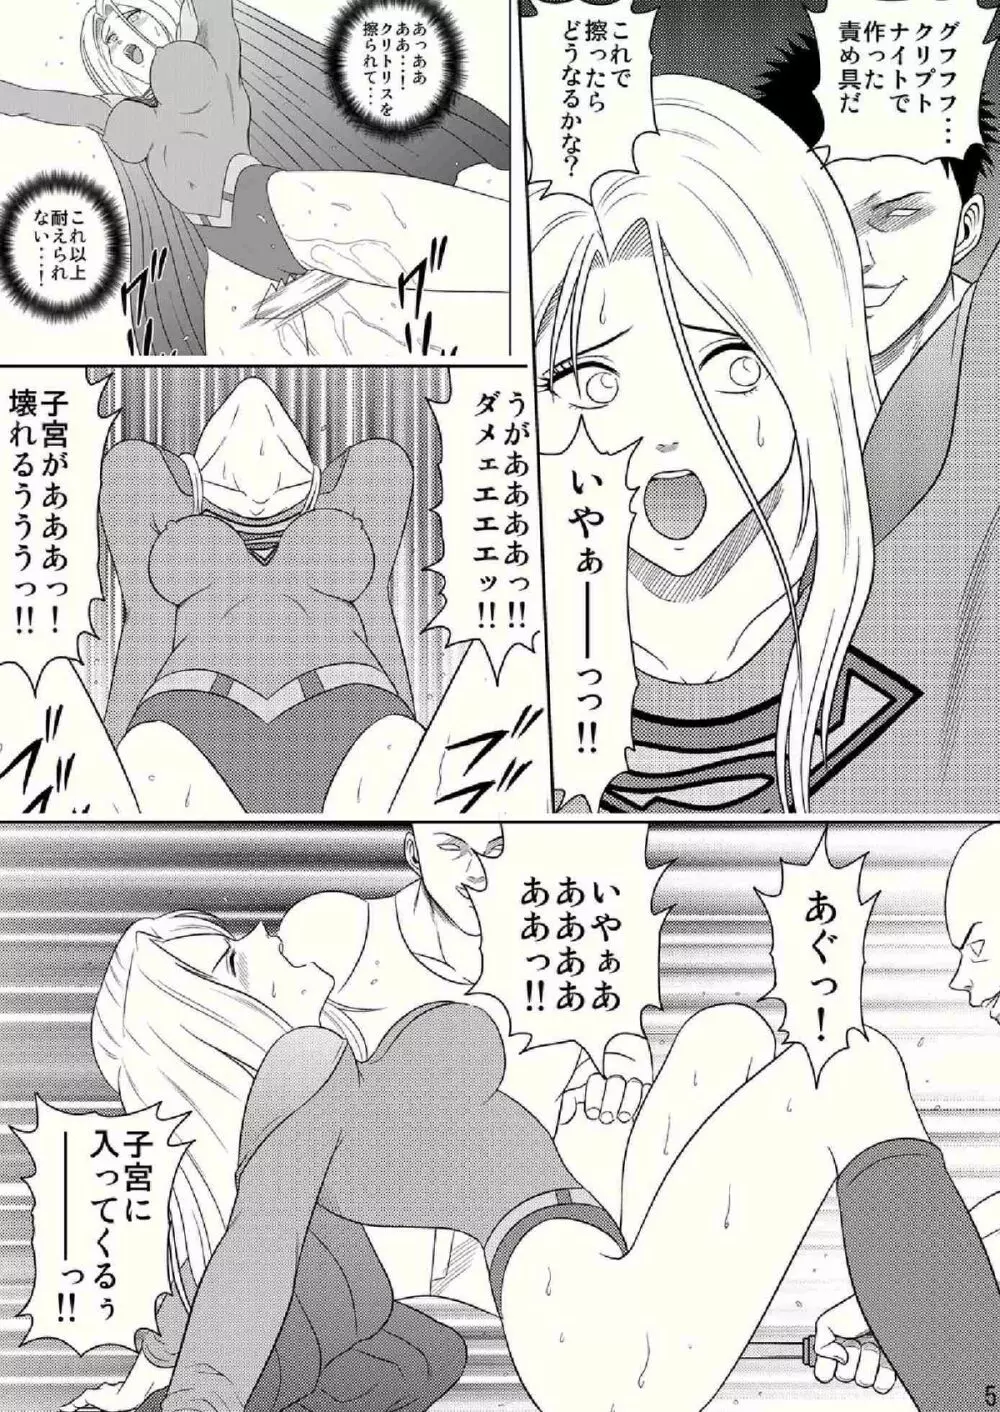 Toukikoubou vol.2 SUPER GIRL - Humiliation and Execution - Page.5